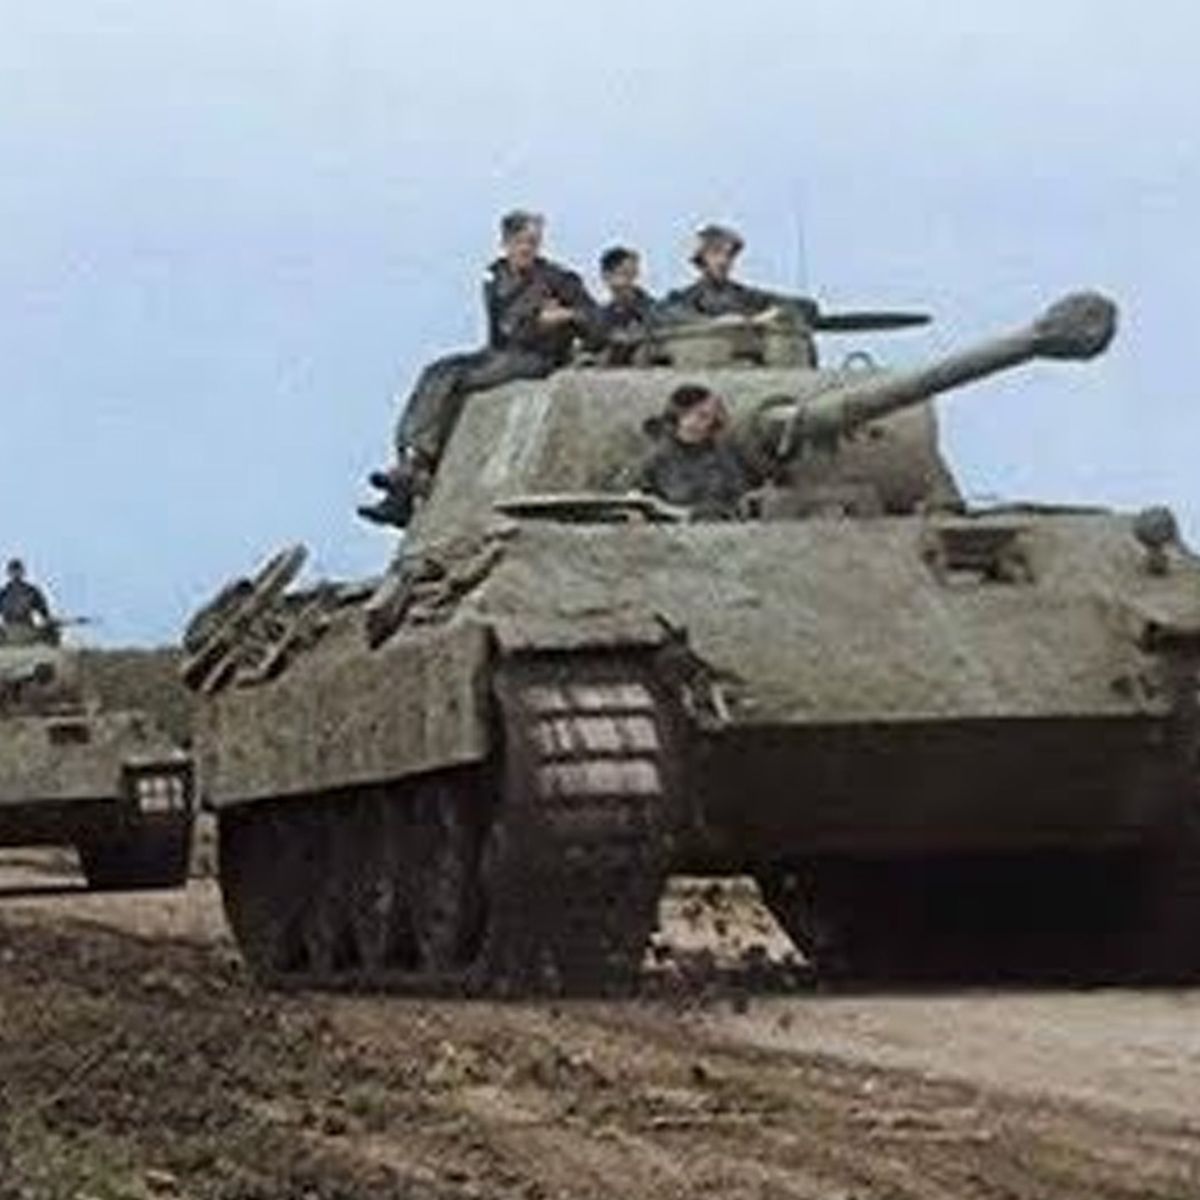 Legal Fight Over Wwii Panther Tank Found In German Basement